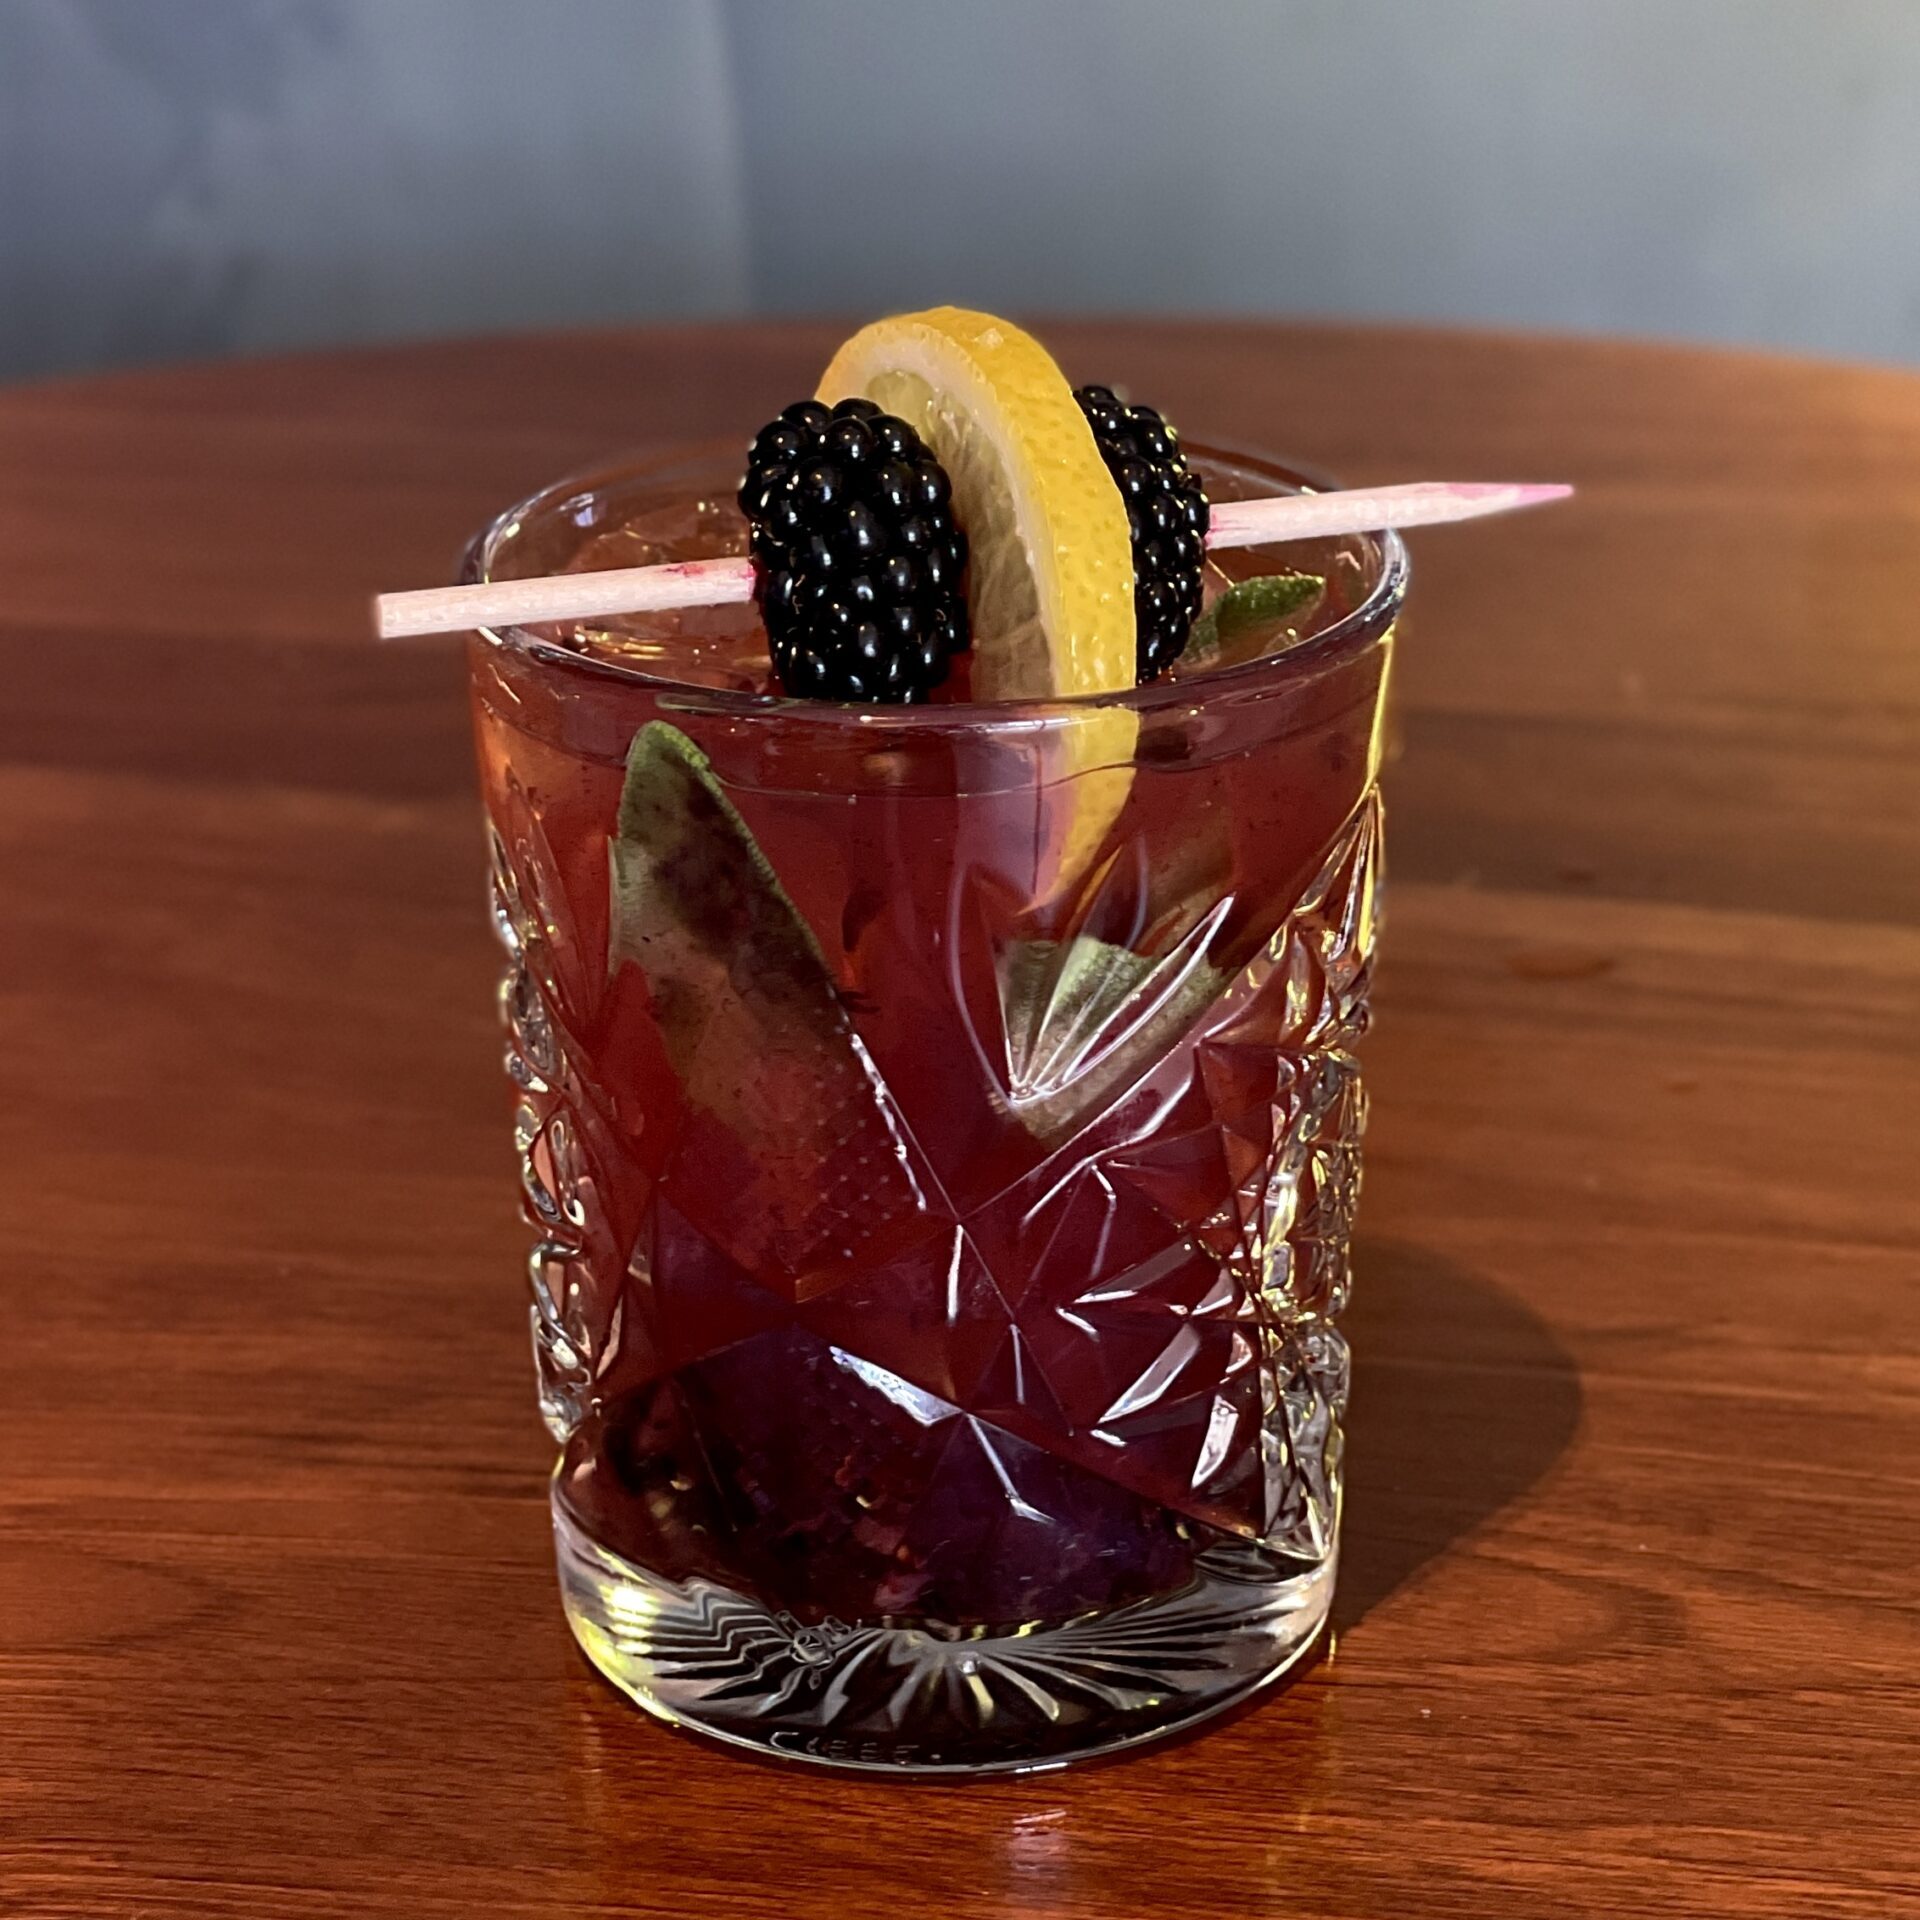 A cocktail in a crystal rocks glass, garnished with a blackberry and lemon skewer.